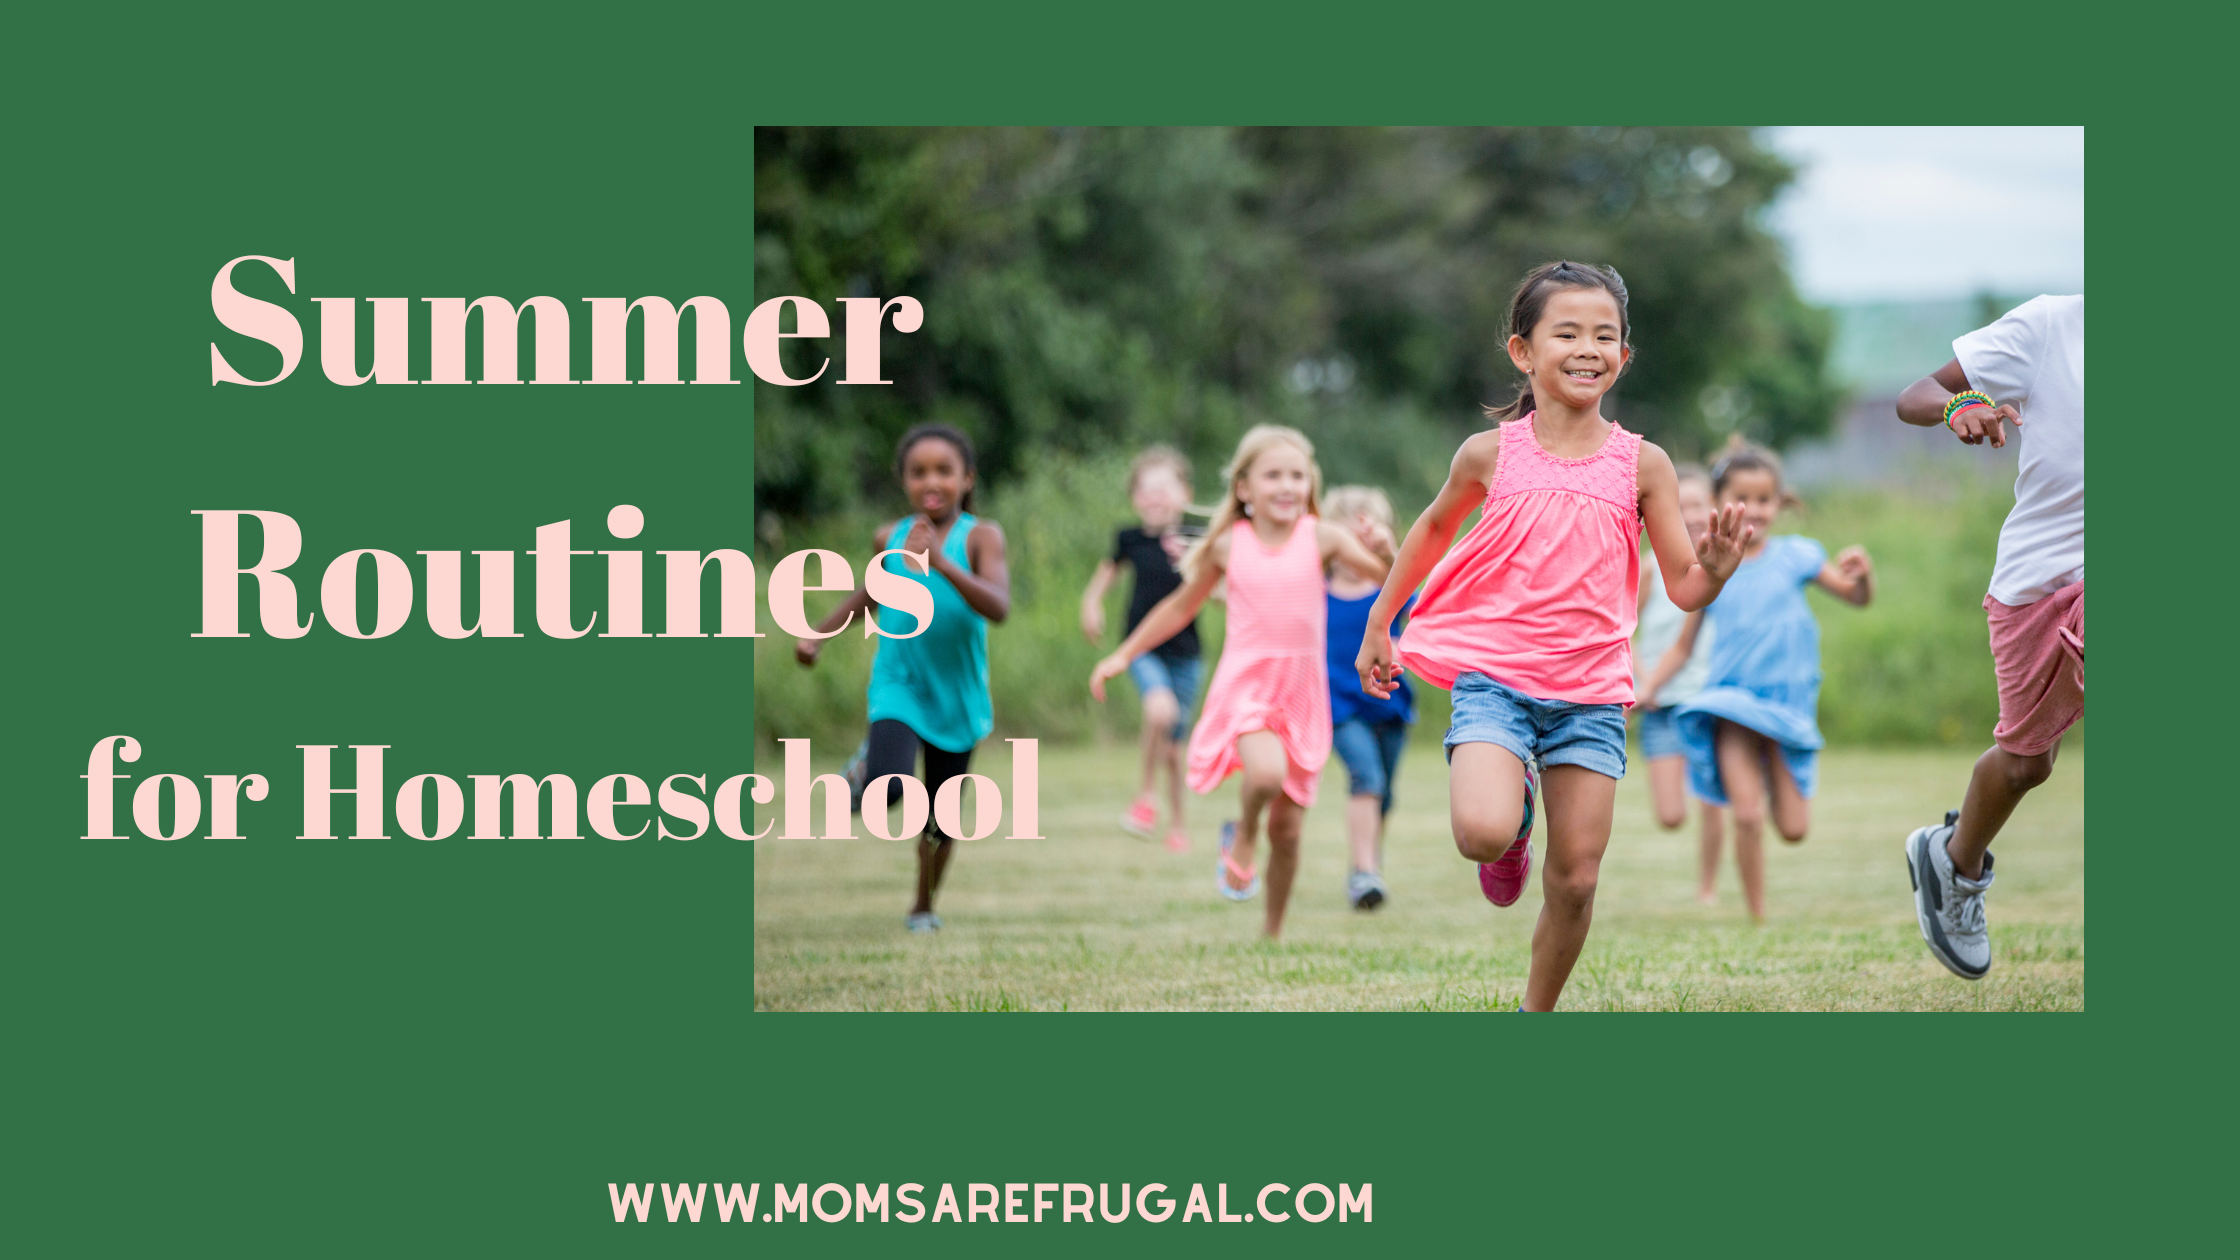 Summer Routines for Homeschool